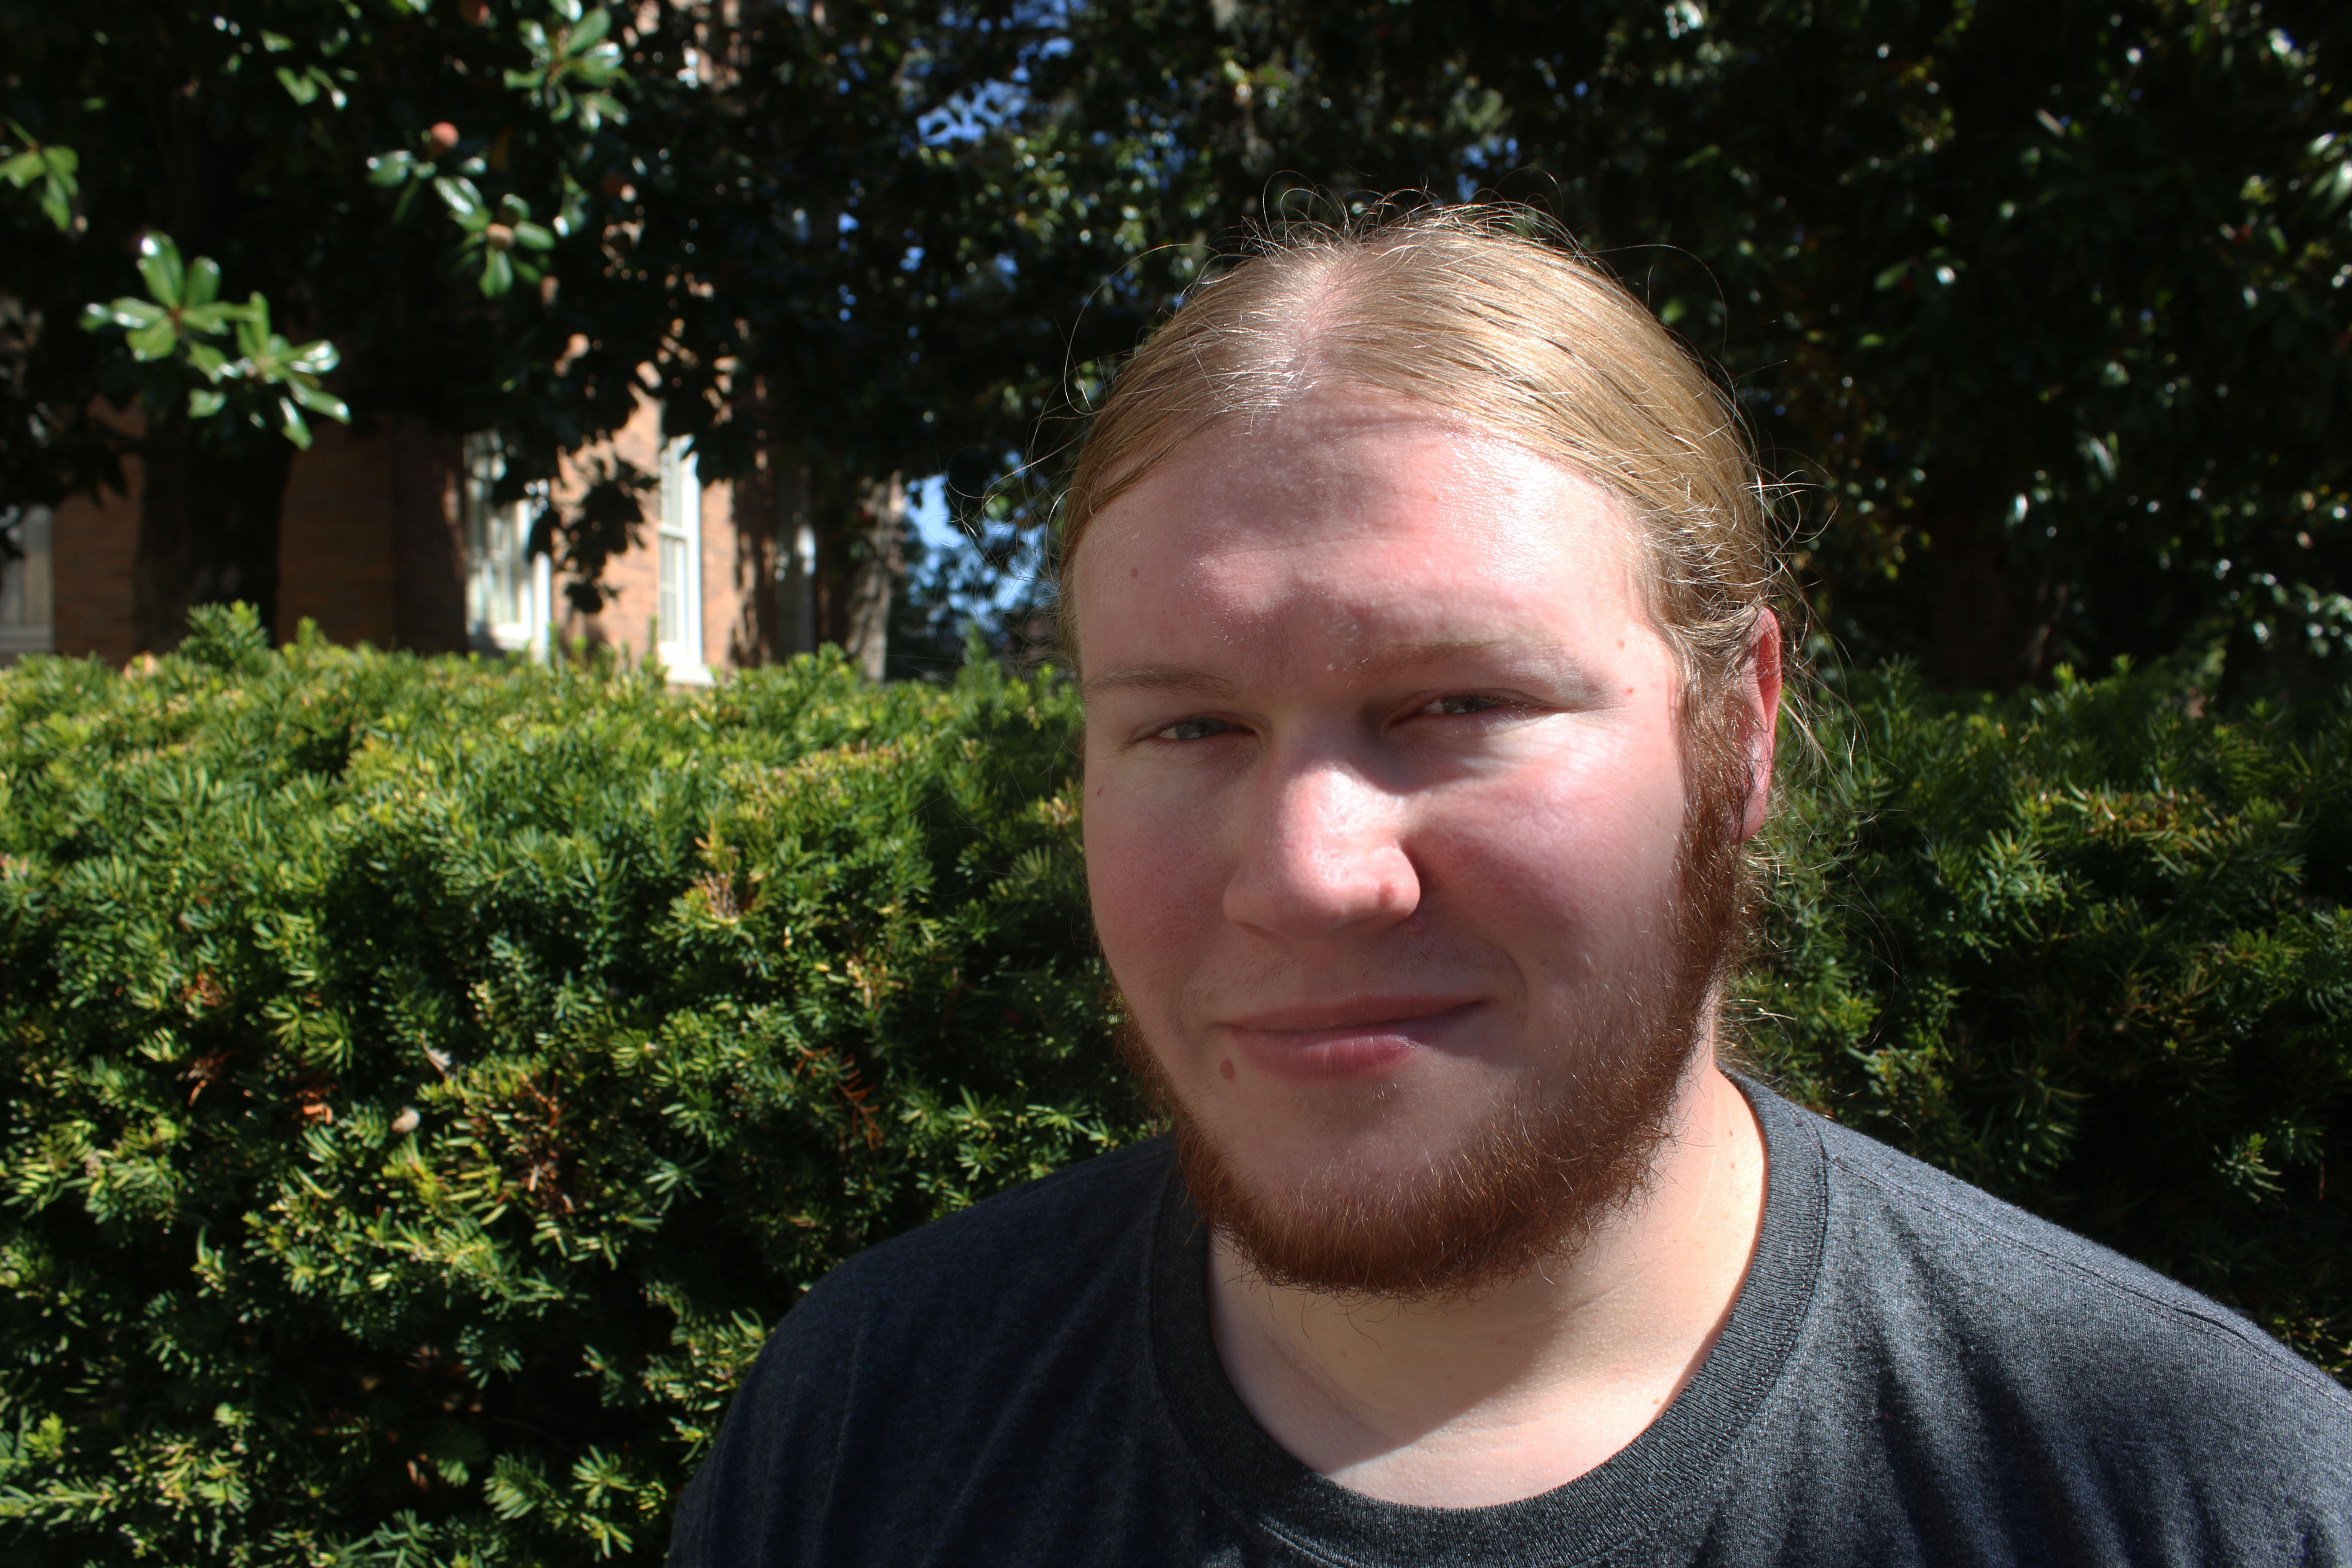 Dalton Beard is a Maryville College student who shares his opinion on politics. Photo by Clair Scott.